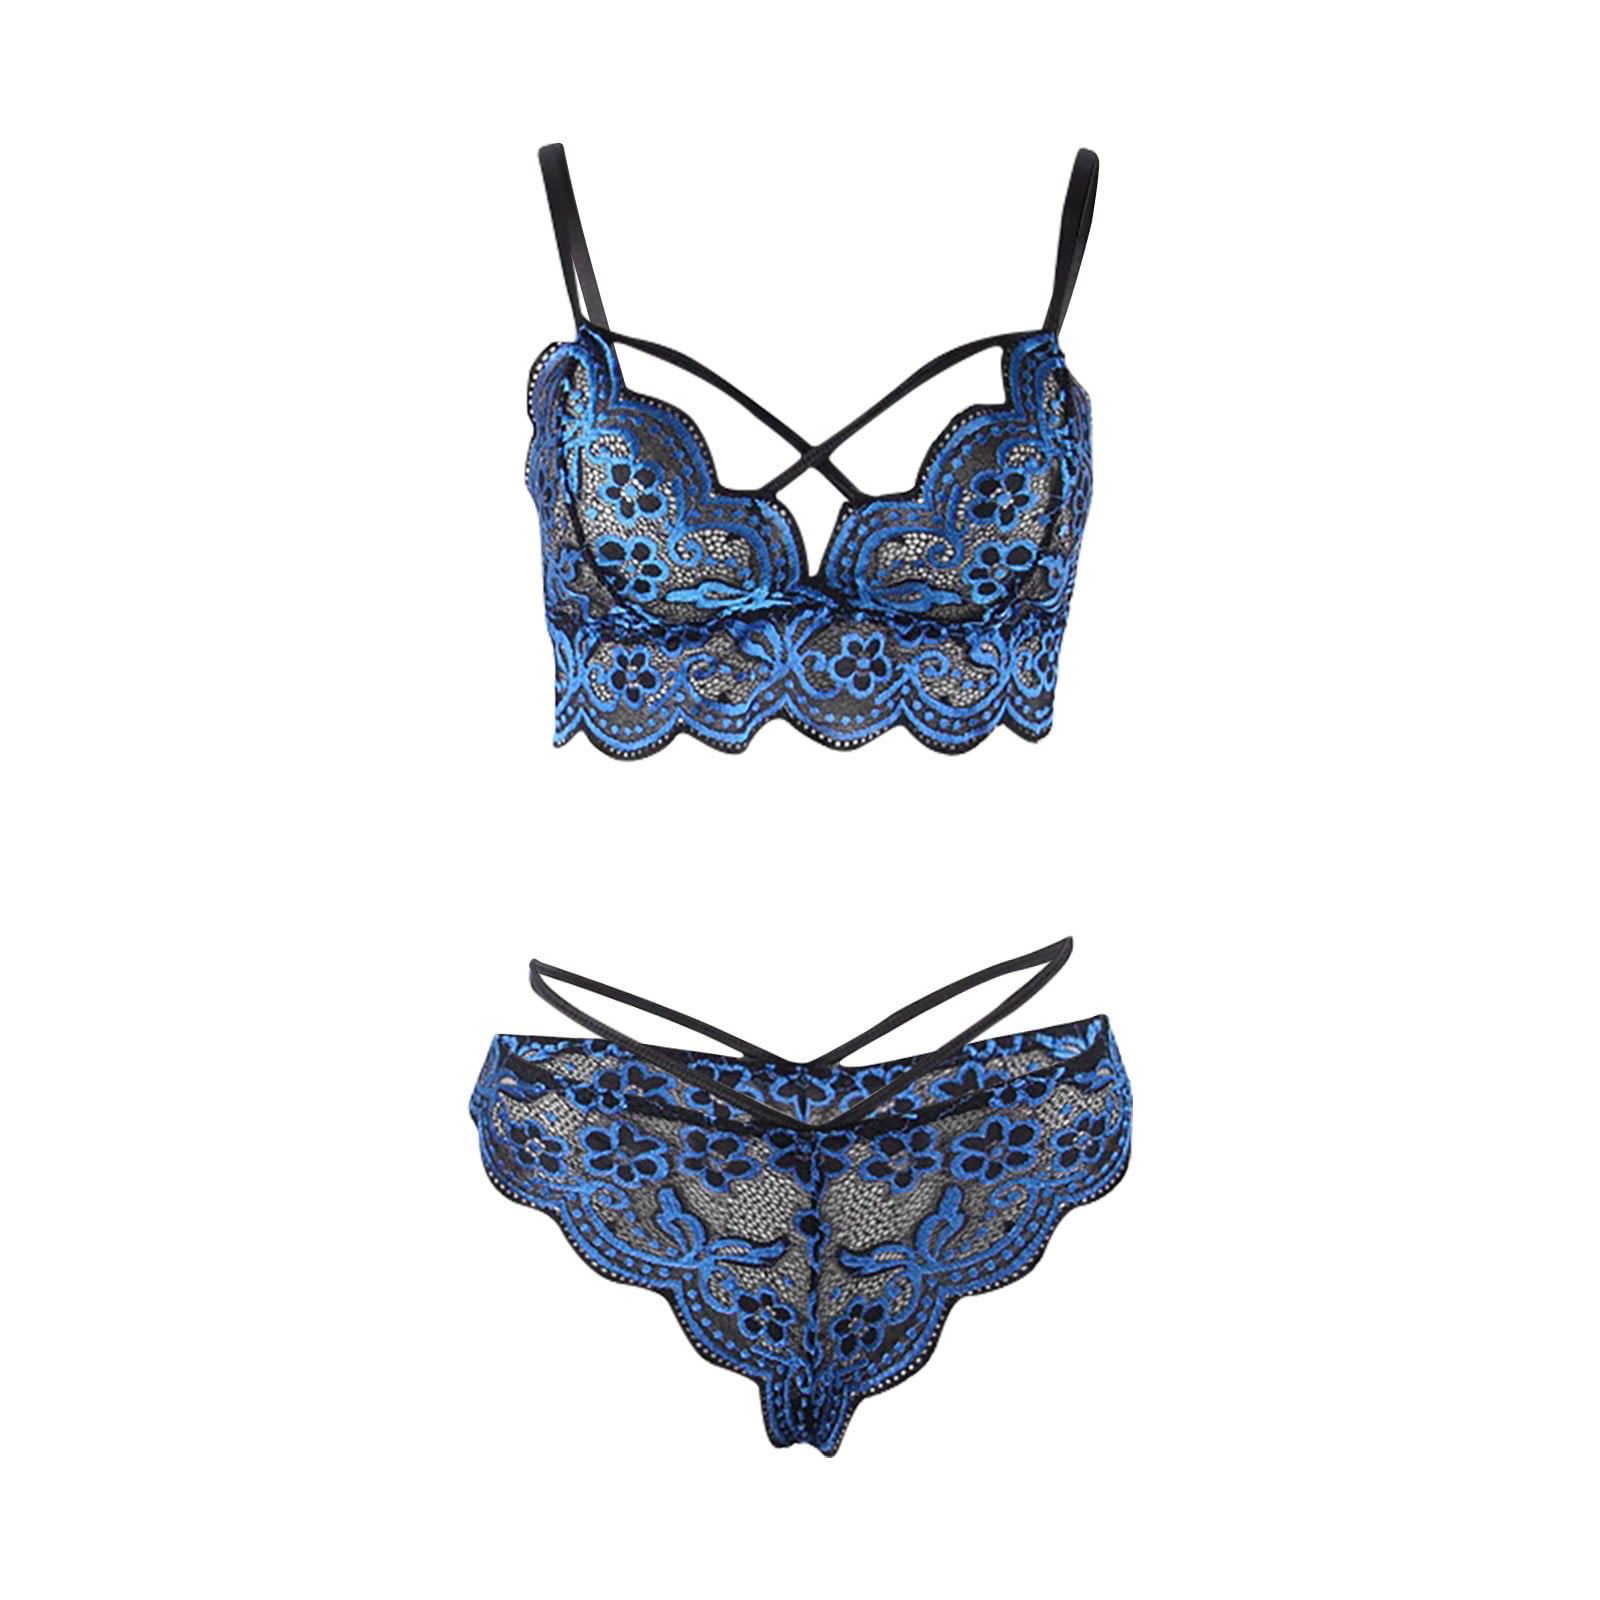 Sexy Lace Demi Bras With No Underwire For Women Plusgalpret Push Up Bras  With No Underwirelette In Blue, Black, And Beige Available In Cup Sizes 34  40 From Lqbyc, $21.16